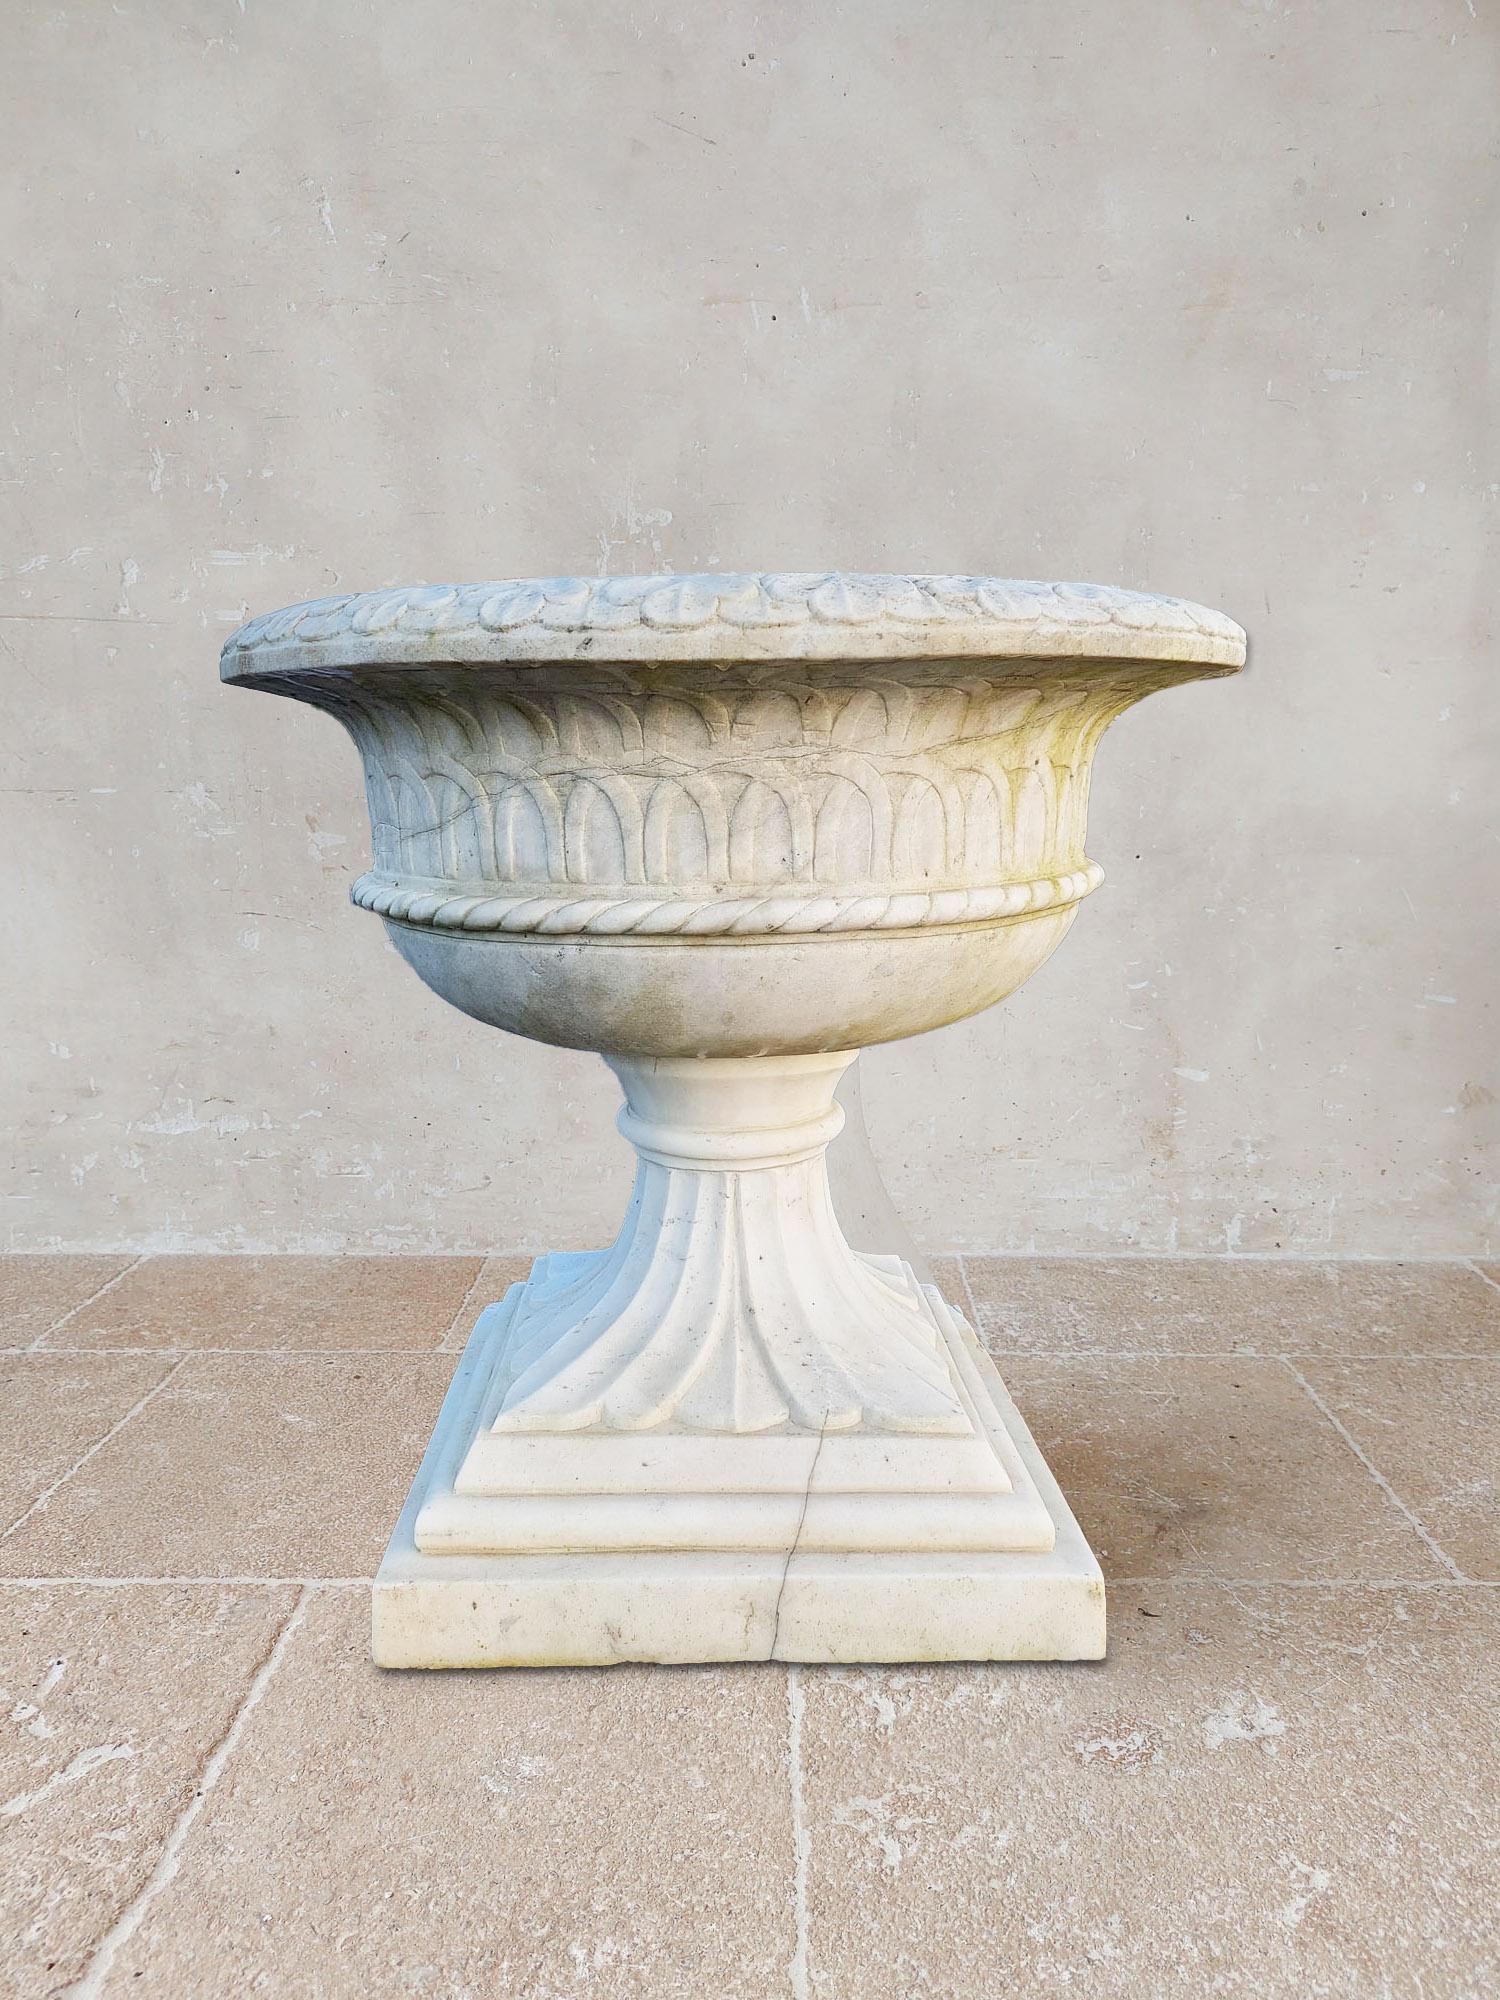 Extra large antique garden vase made of white Carrara marble, baptismal font size, from around 1890, with carved details of leaves and patterns.

h 93 cm, diameter 102 cm
inside diameter ± 56 cm
base: 61 x 63.5 cm